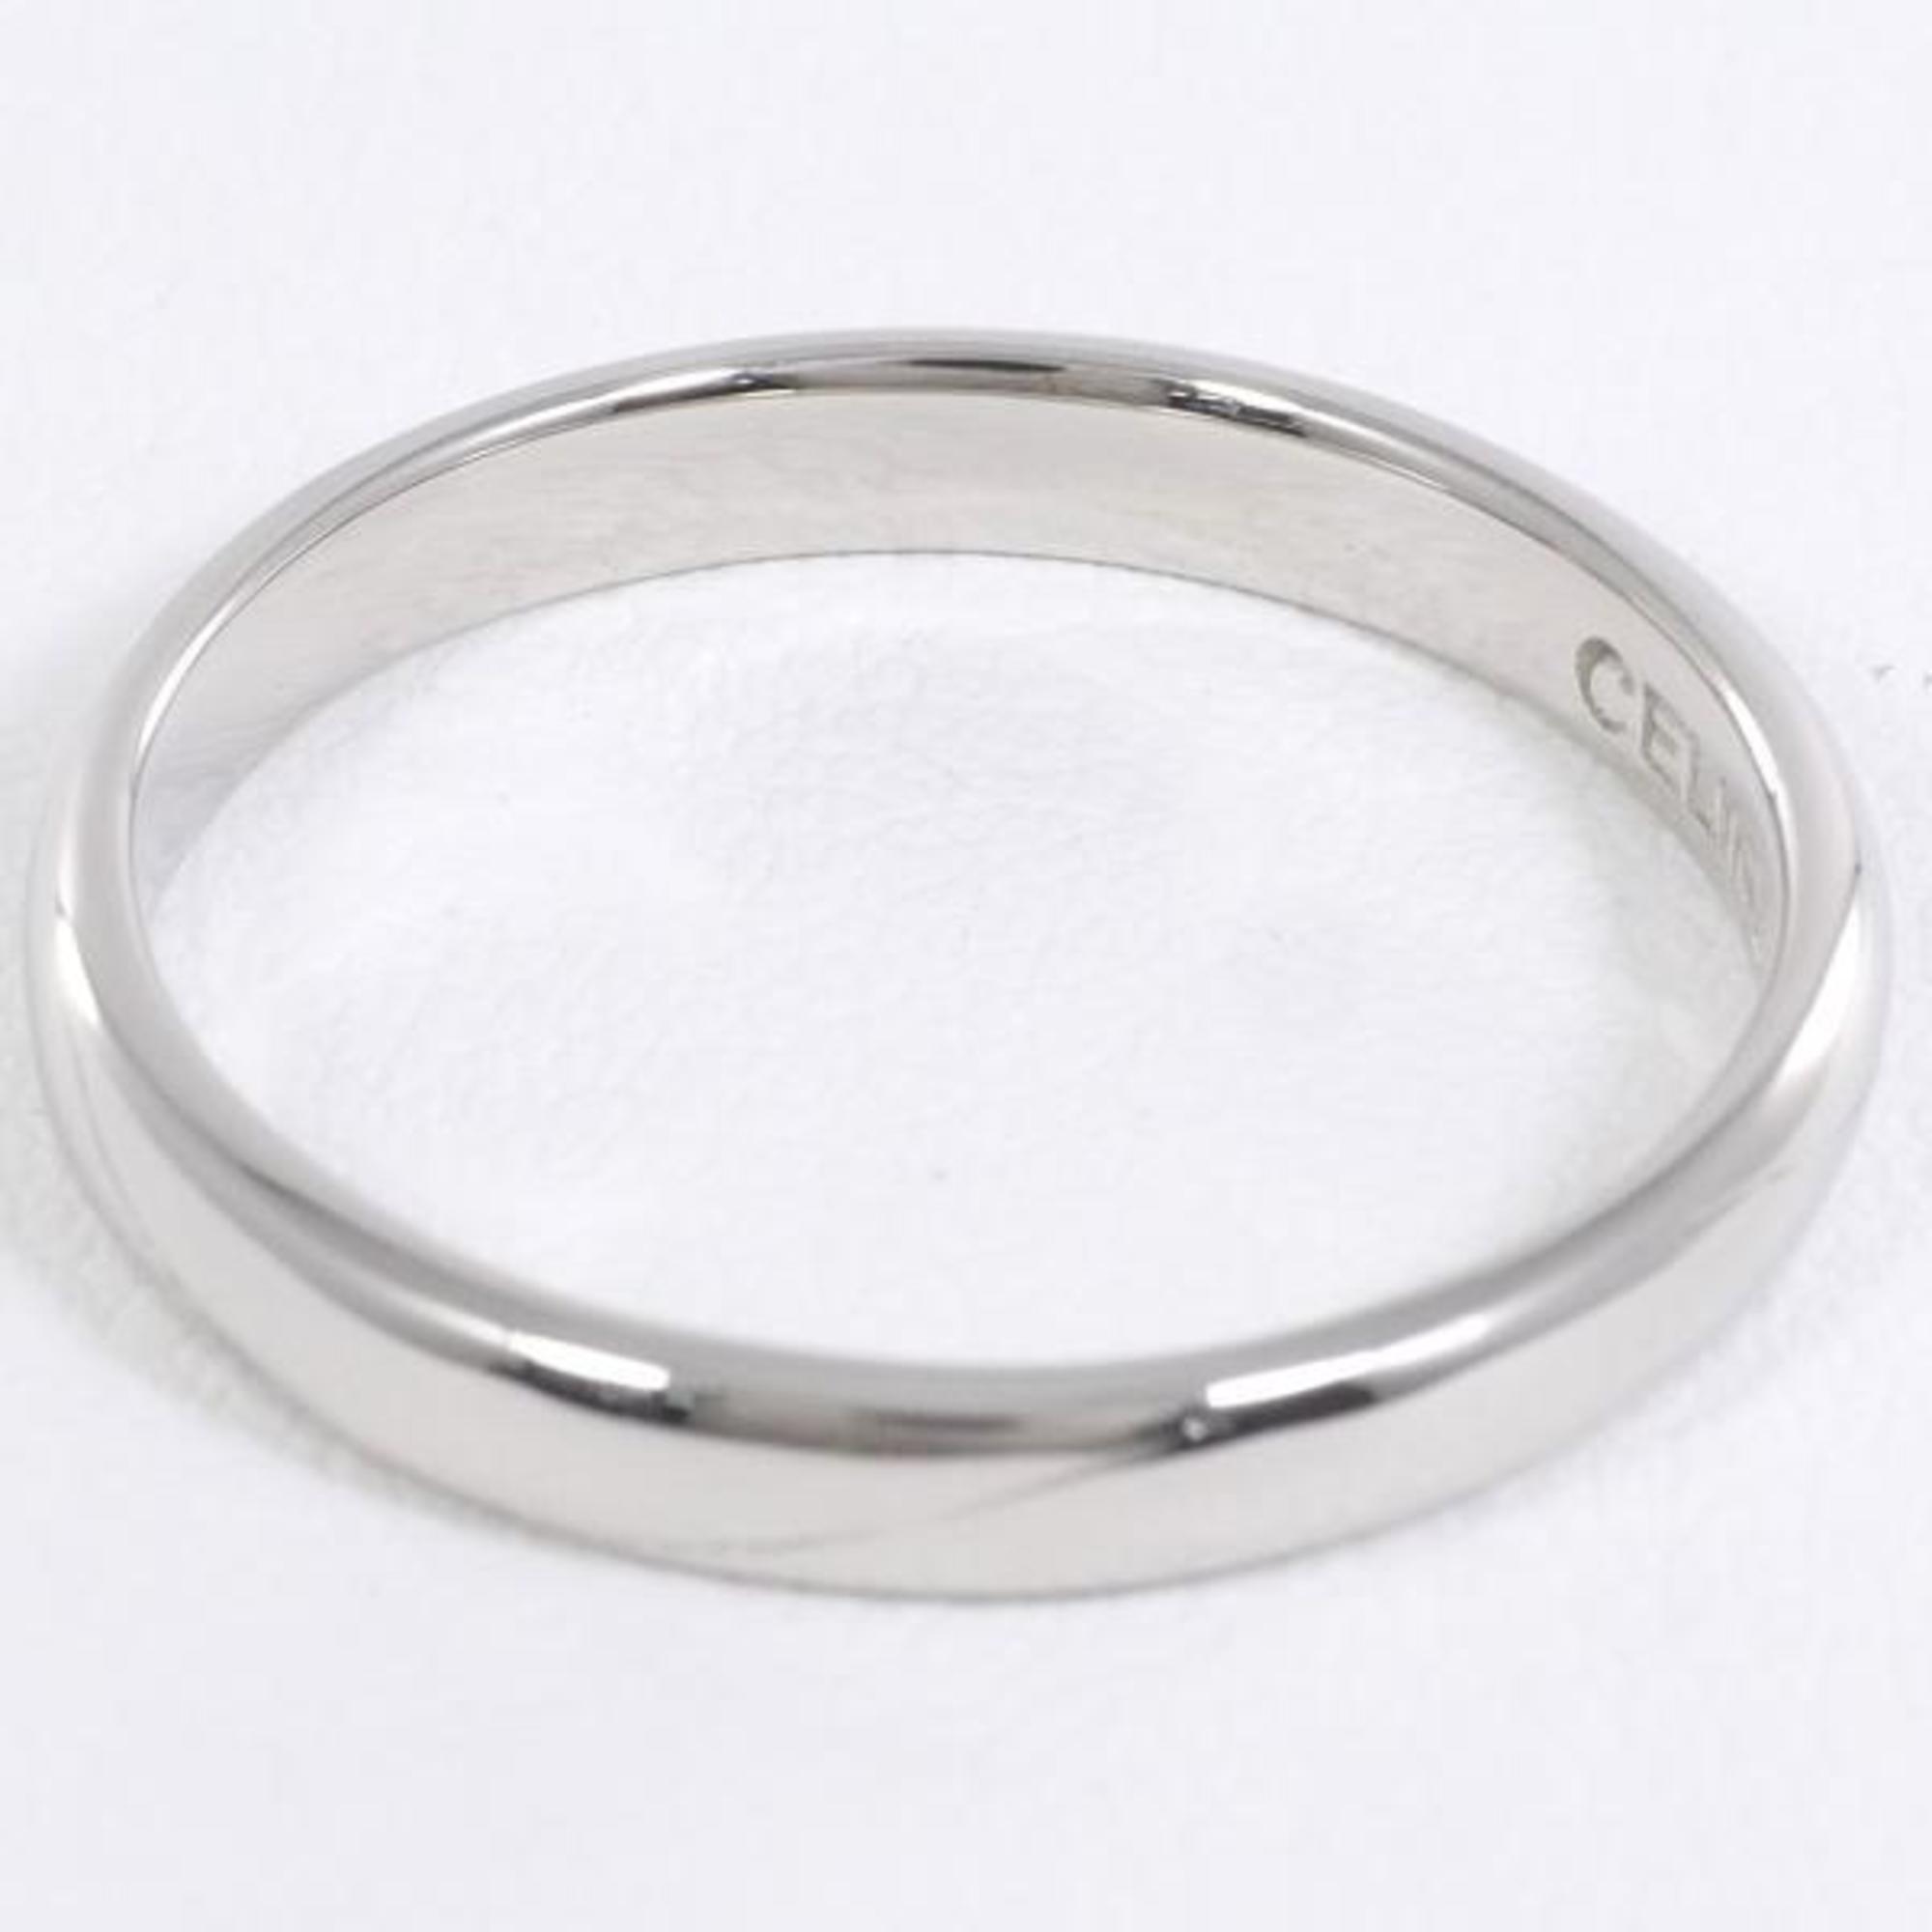 Celine PT900 Ring No. 13 Total Weight Approx. 3.4g Jewelry